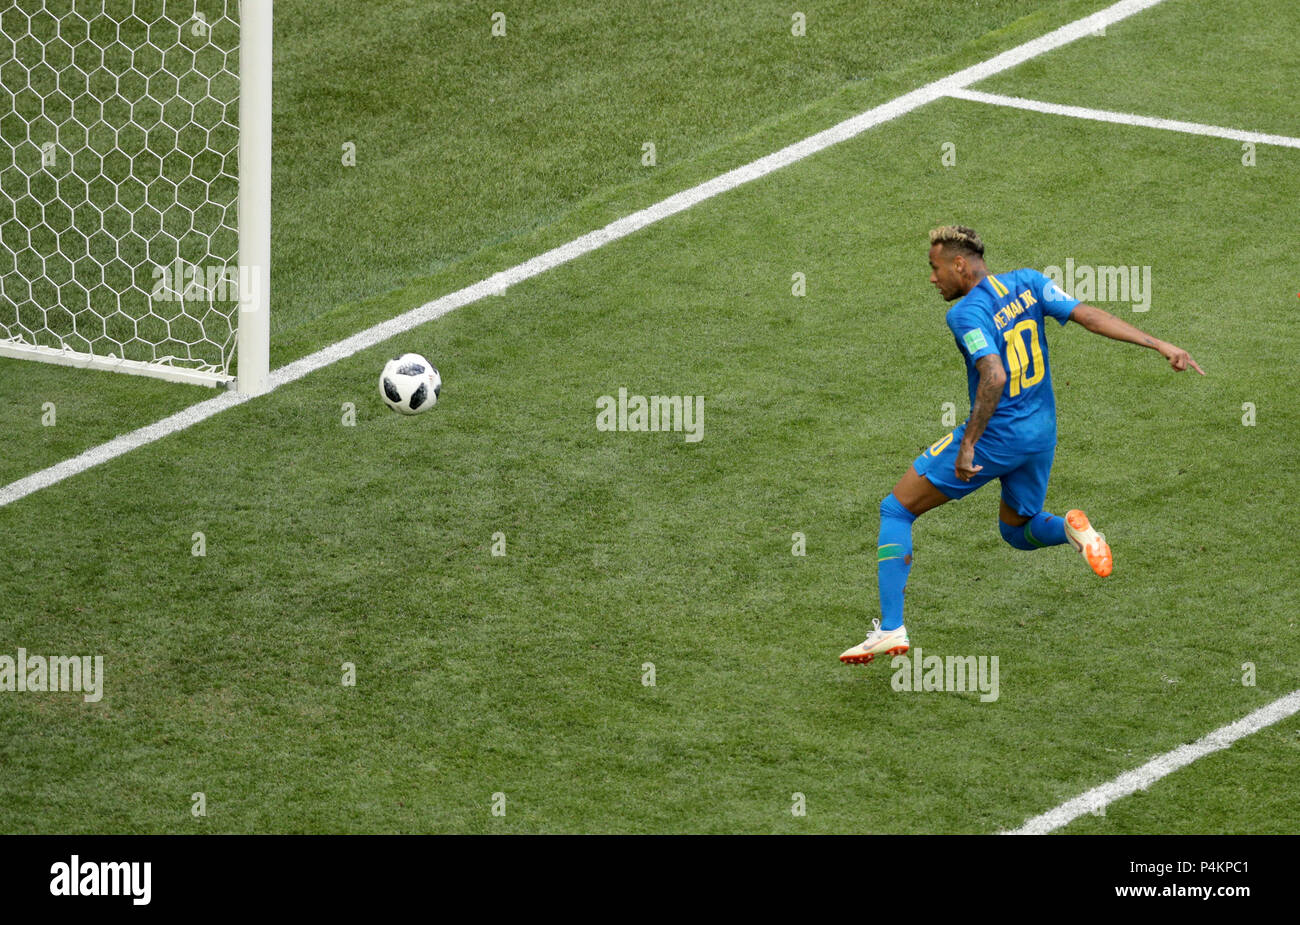 Brazil's Neymar scores his side's second goal of the game during the FIFA World Cup Group E match at Saint Petersburg Stadium, Russia. PRESS ASSOCIATION Photo. Picture date: Friday June 22, 2018. See PA story WORLDCUP Brazil. Photo credit should read: Owen Humphreys/PA Wire. Stock Photo